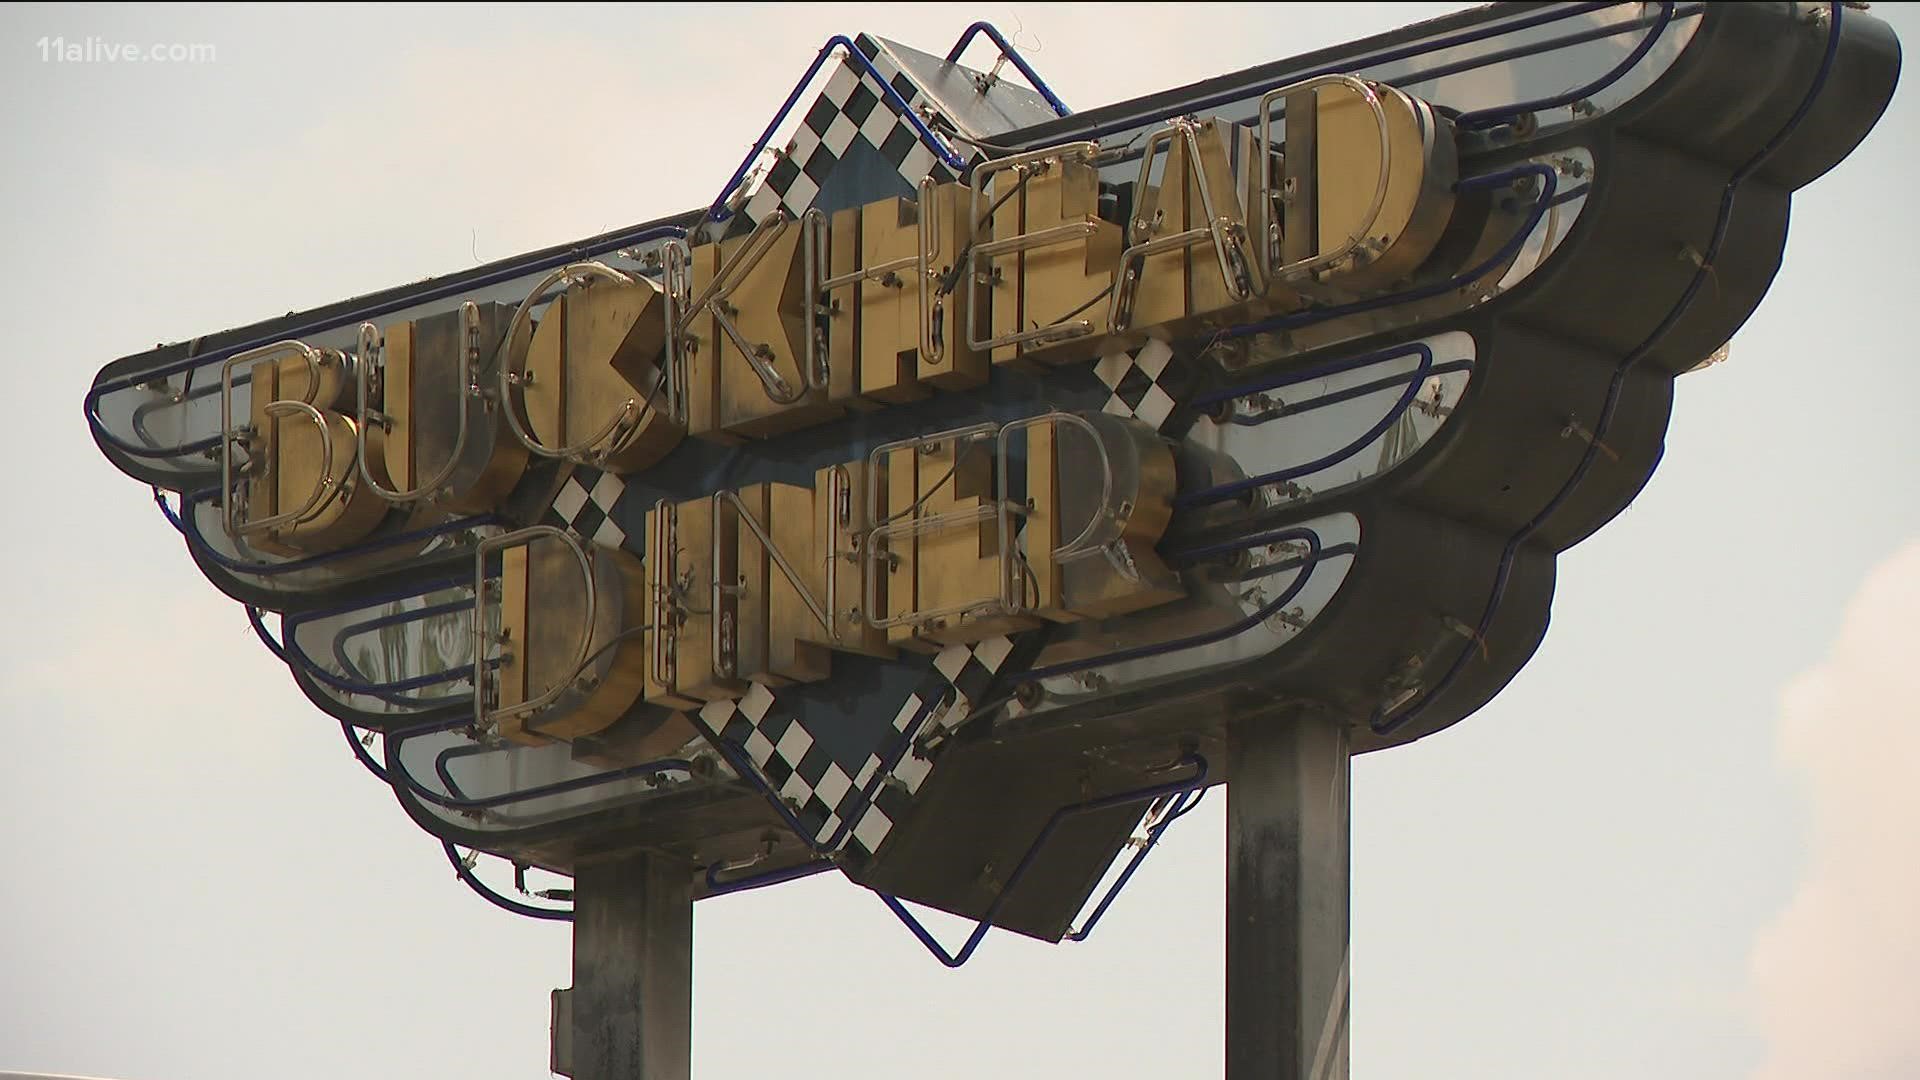 A staple in Buckhead for more than 30 years will not reopen. The ownership group of Buckhead Diner announced Wednesday that they are permanently closing.